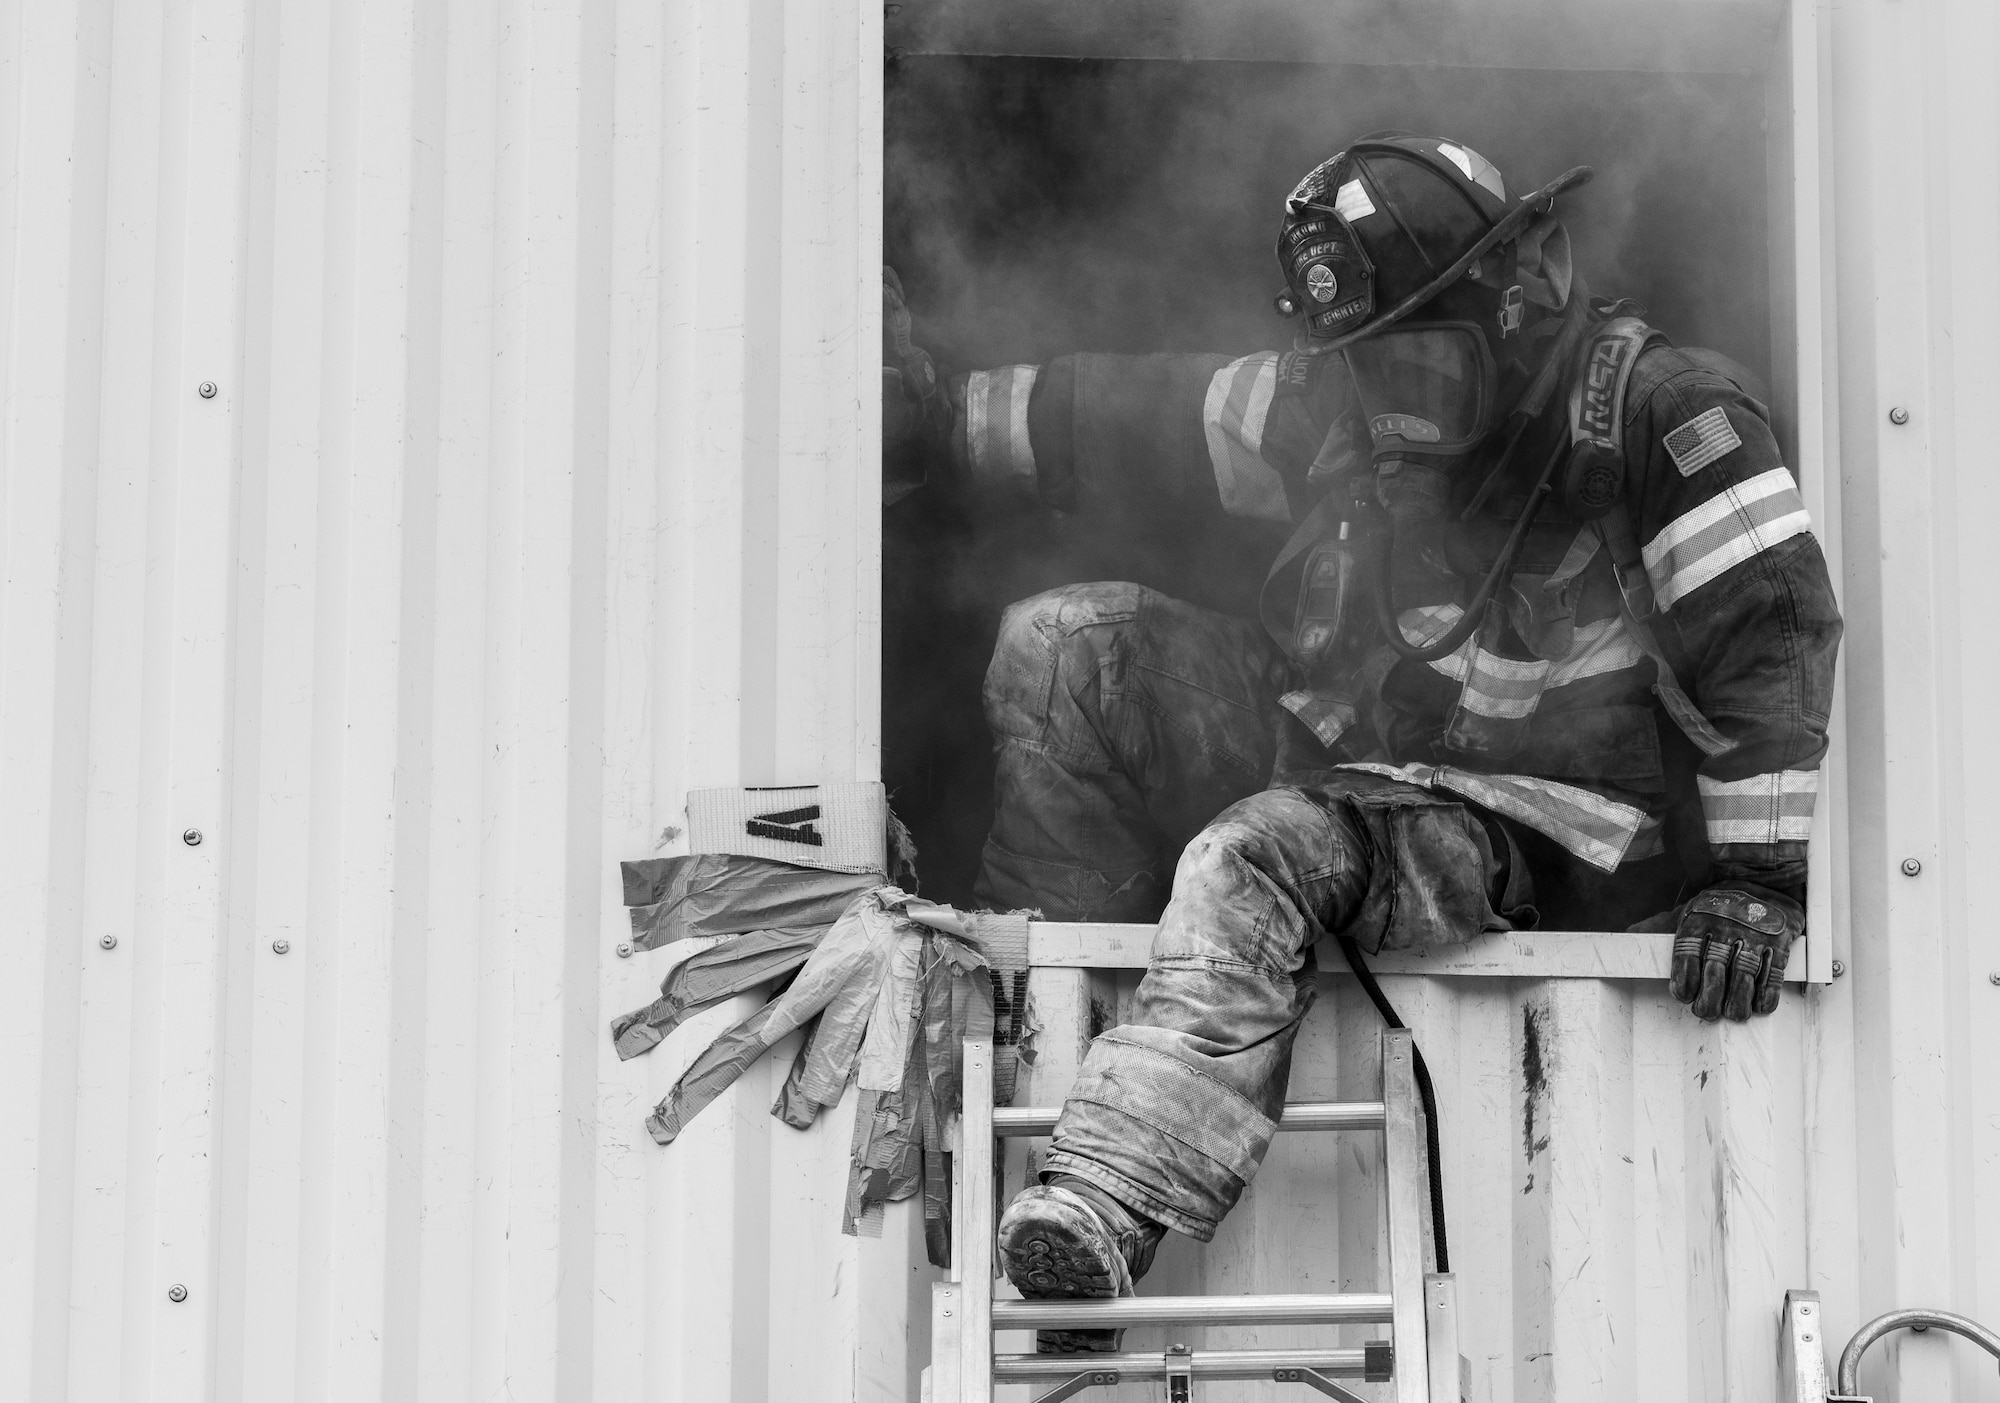 A masked firefighter exits a window via ladder. He is sitting in the frame of the window, with his foot on the second top most rung of the ladder.